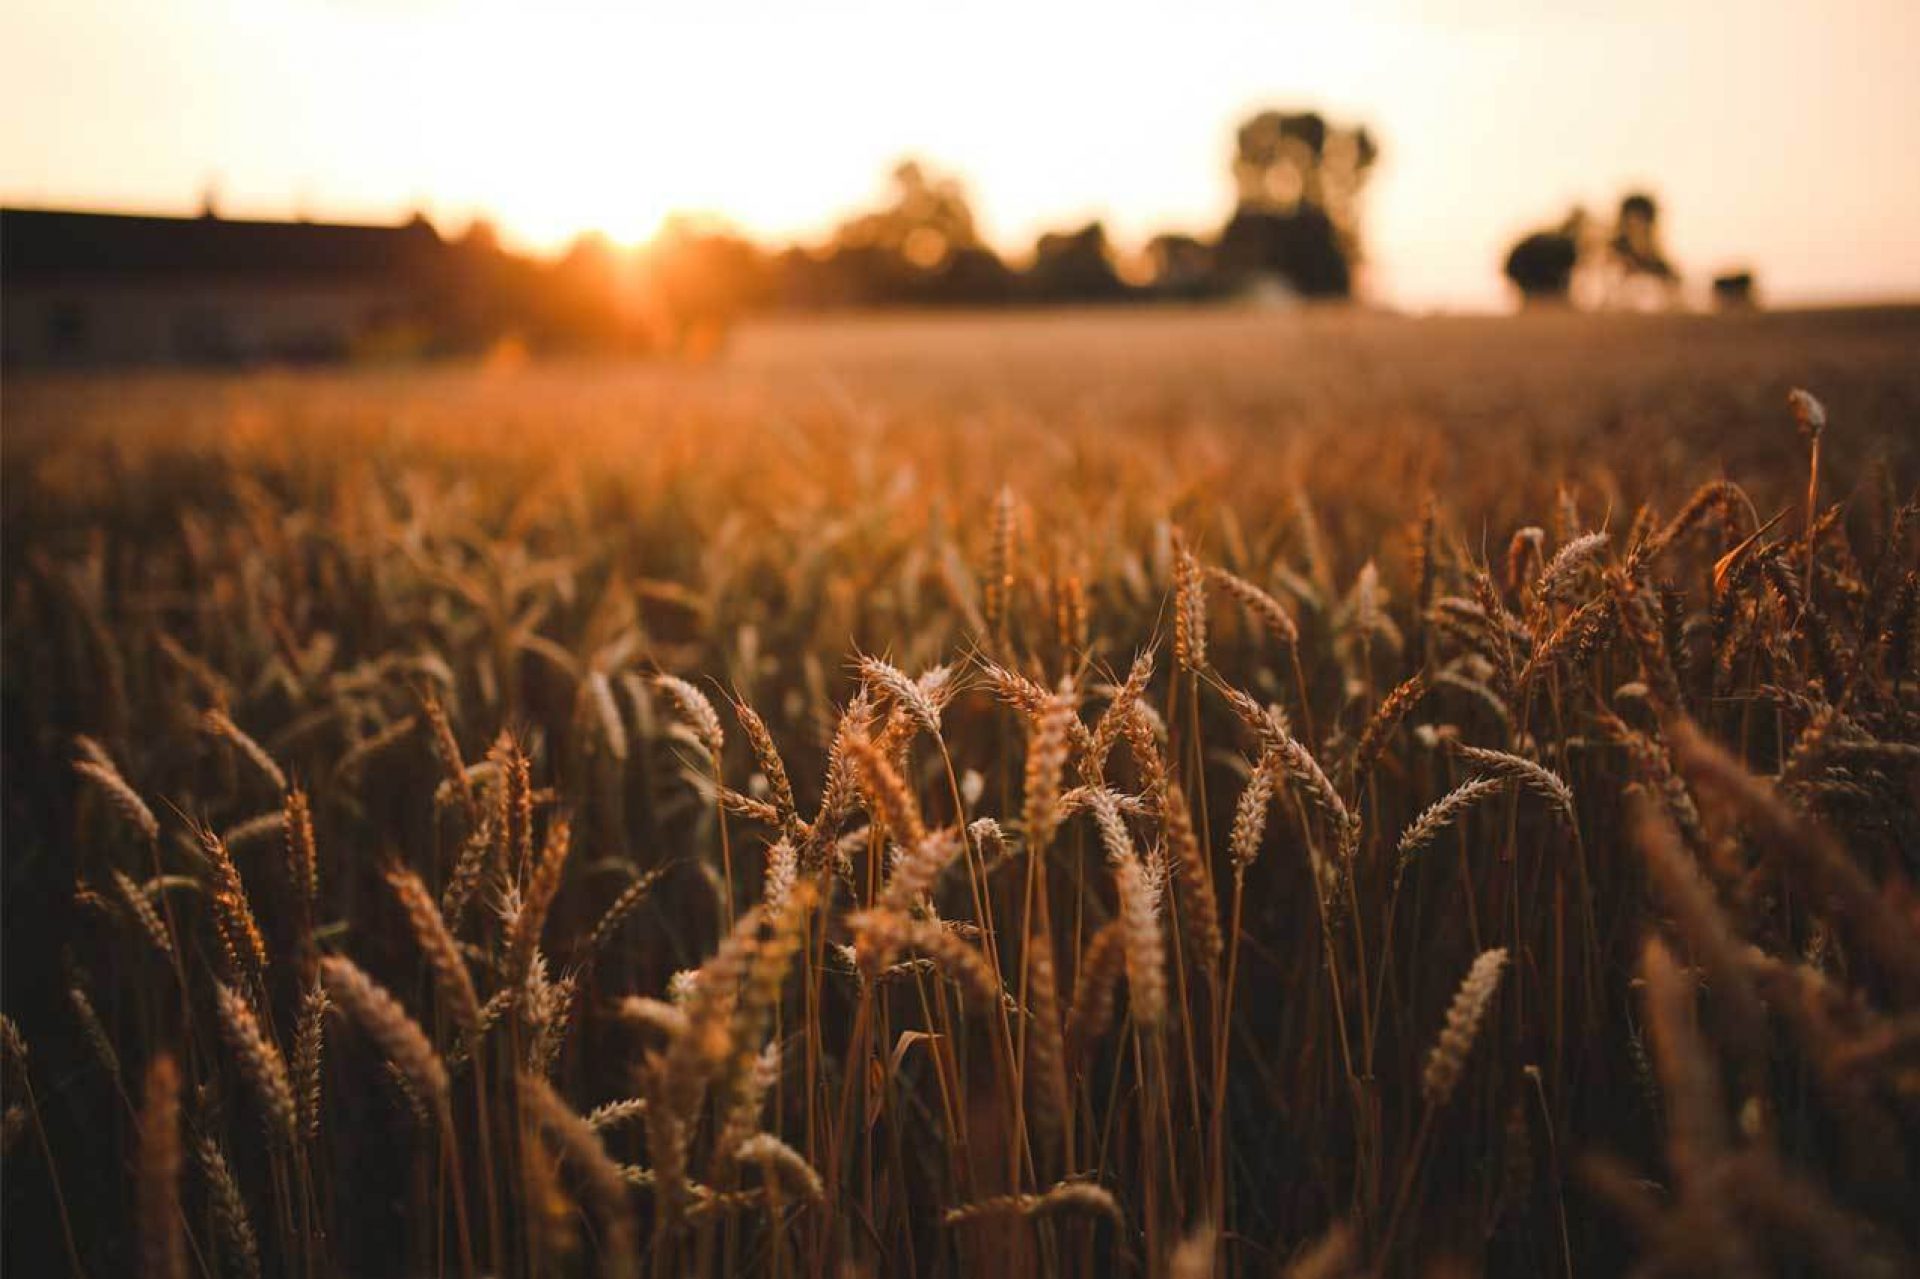 Artistic shot of wheat field at sunset